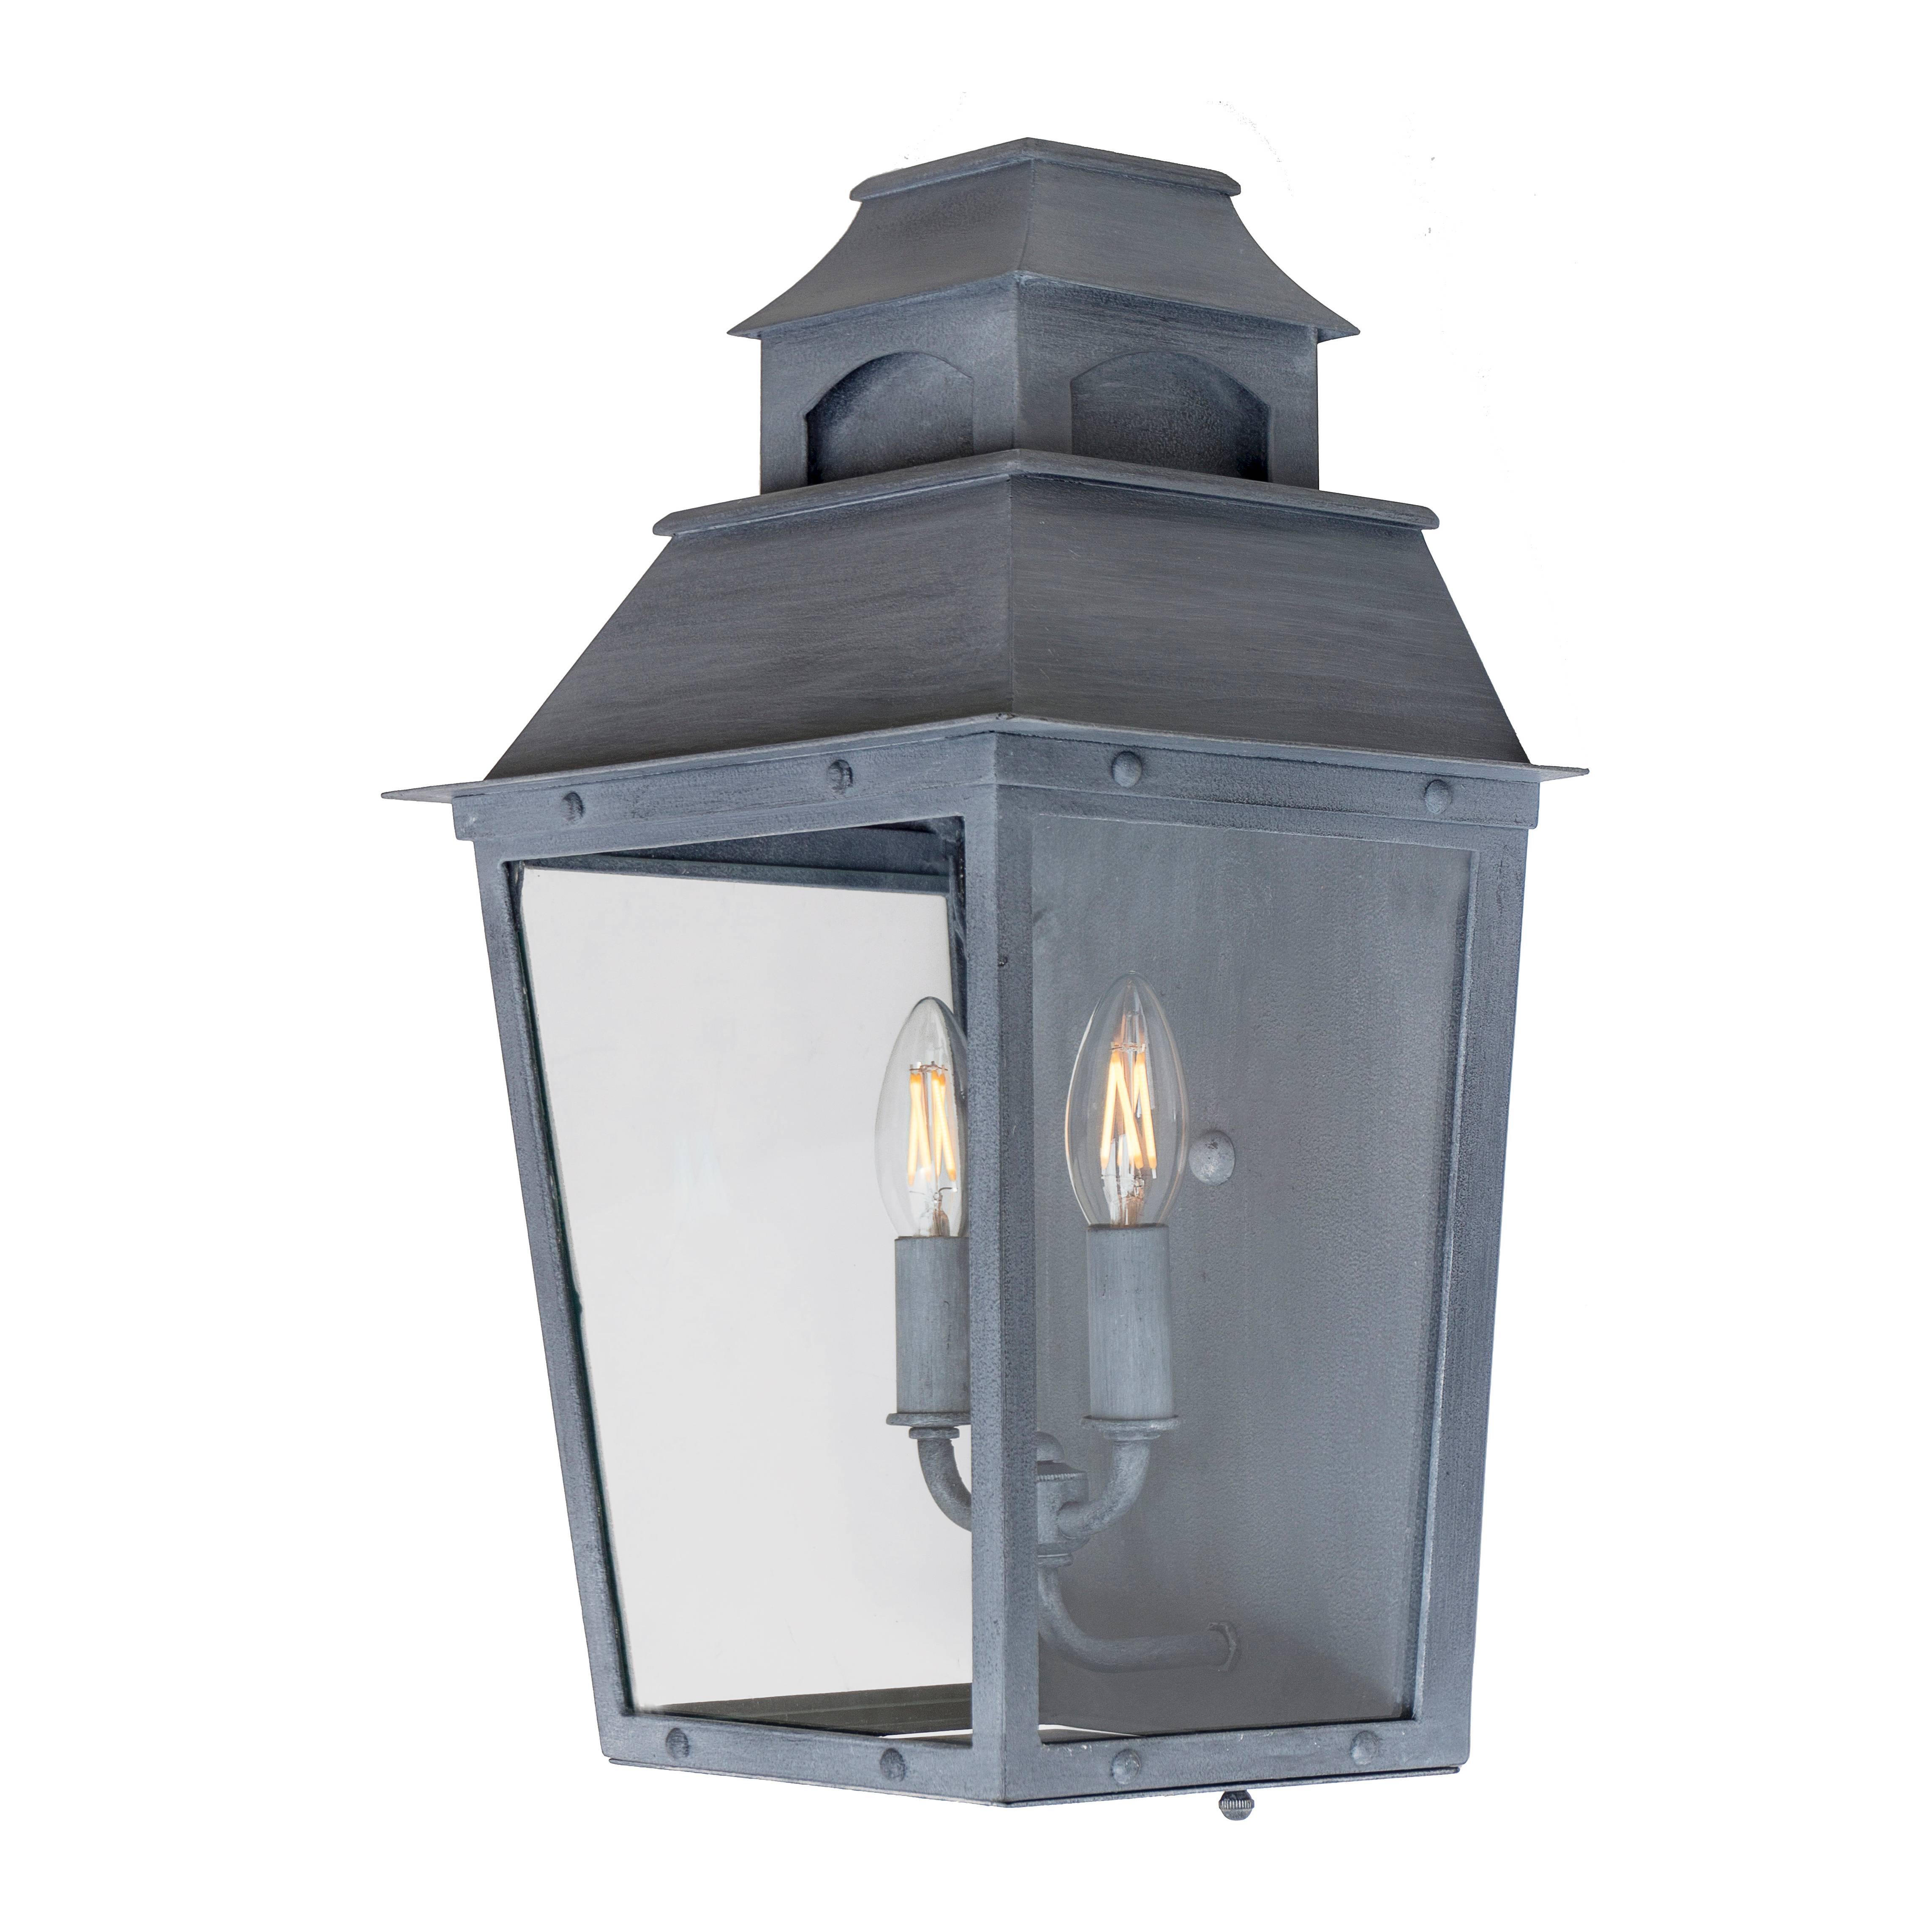 American Colonial Colonial Custom Inspired Wrought Iron Wall Lantern with Premium Zinc Finish For Sale